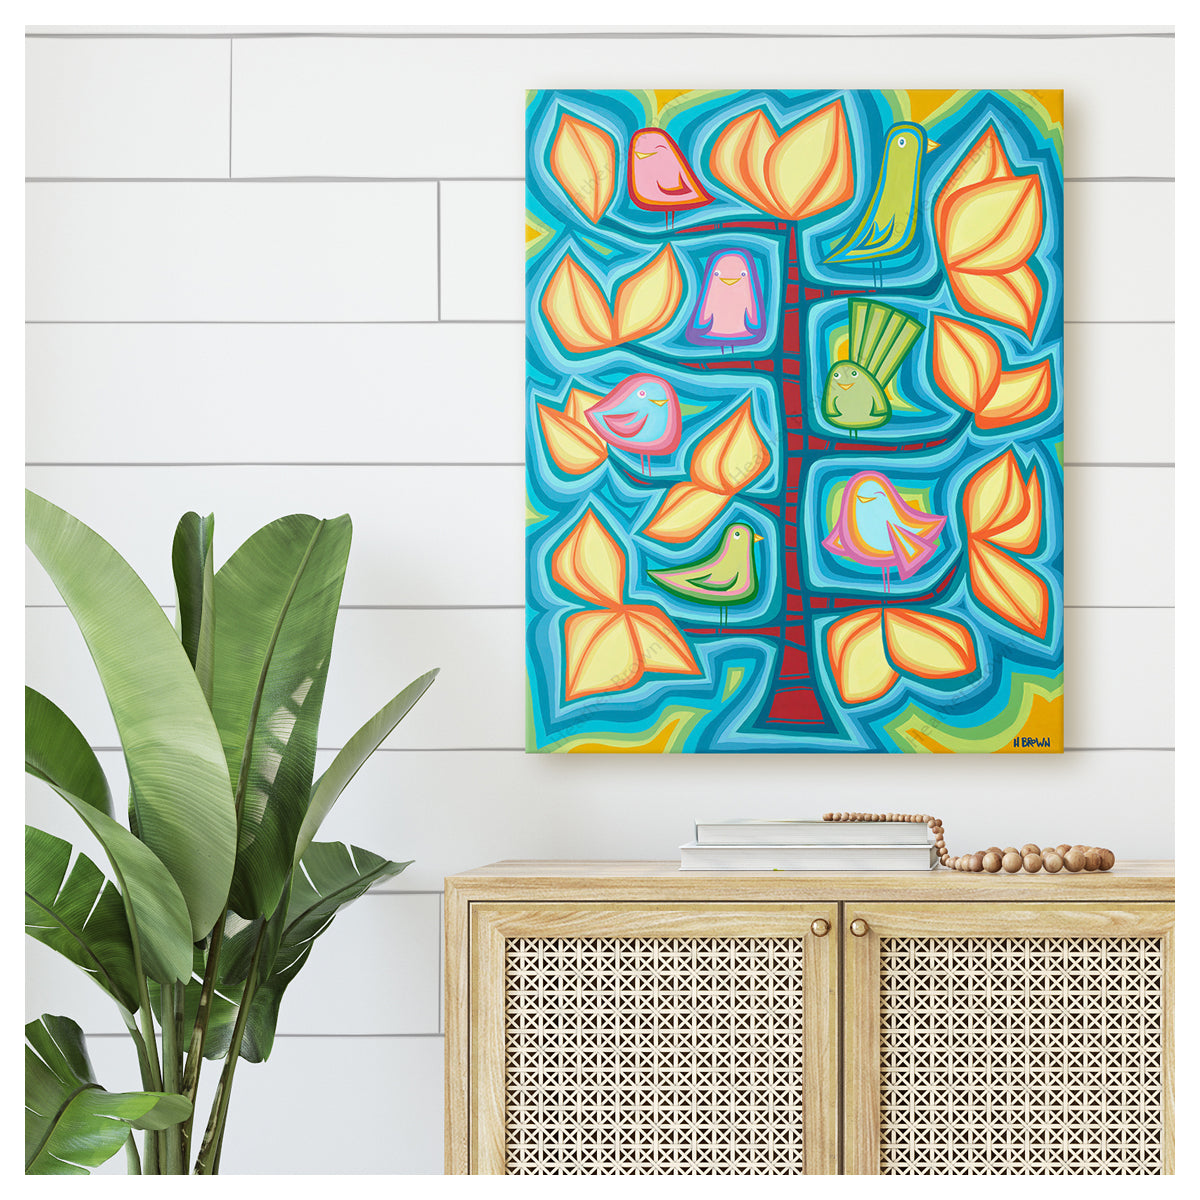 The Good Vibe Tree by Hawaii surf artist Heather Brown Canvas Giclée